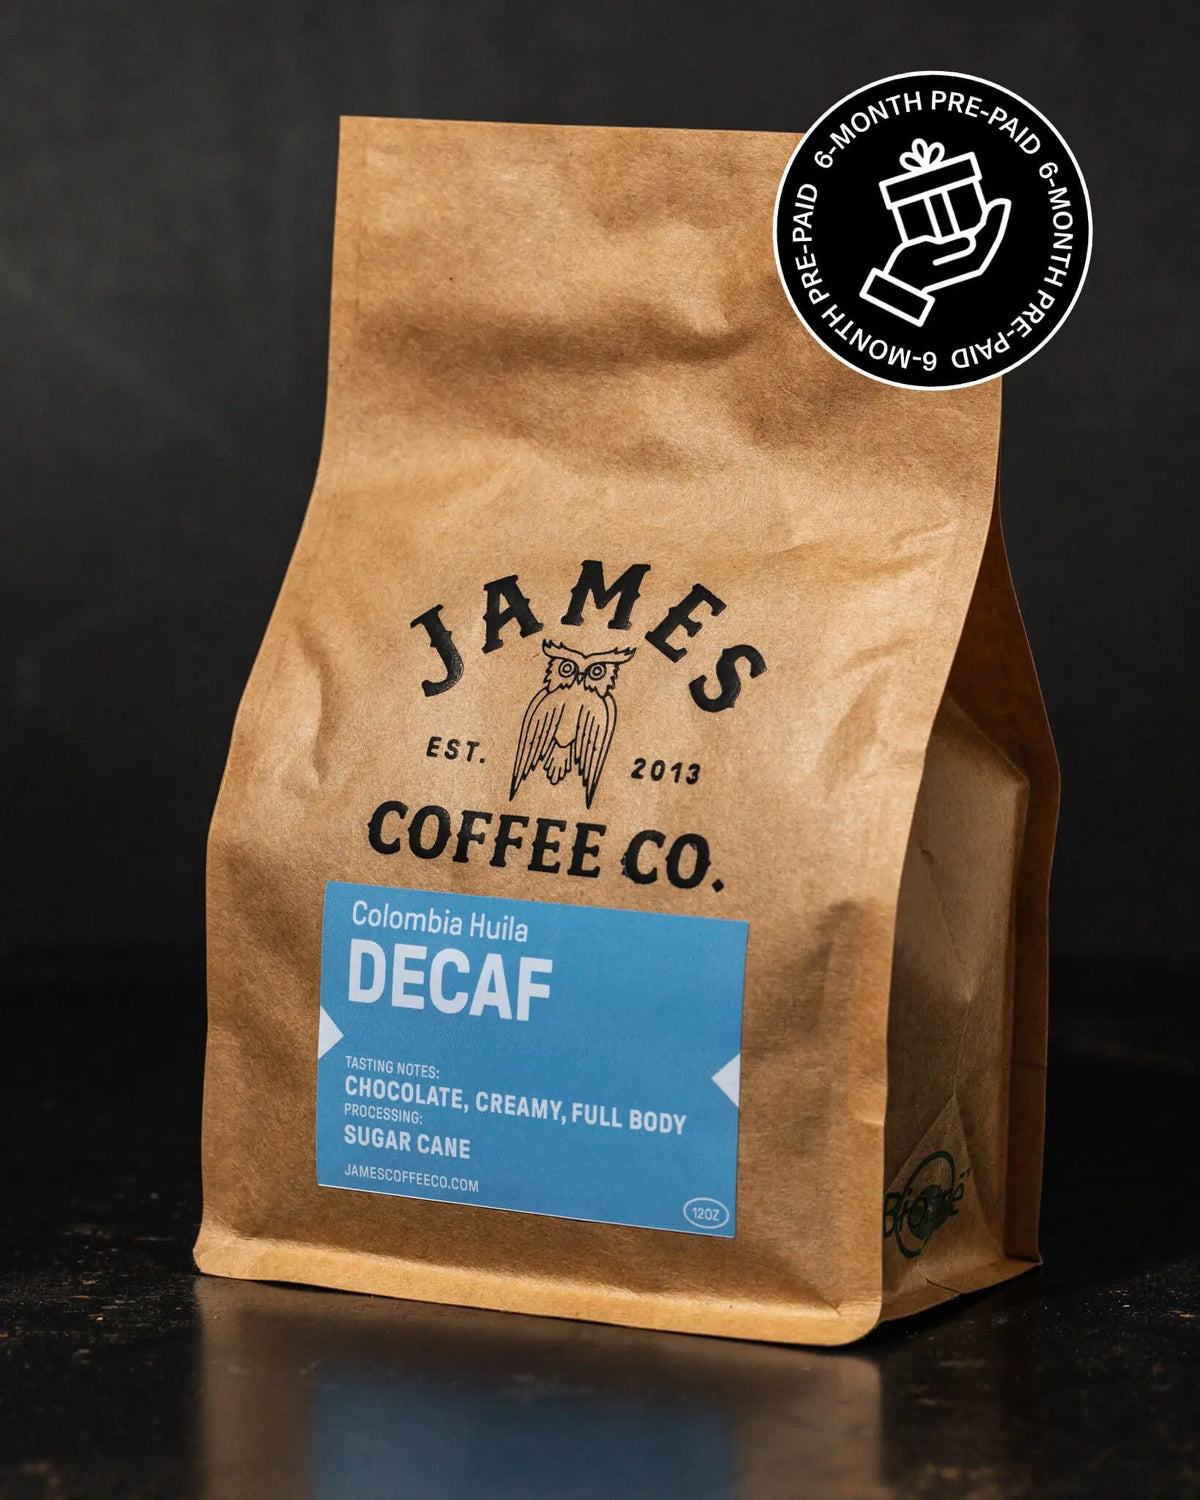 Decaf 6-Month Gift Subscription James Coffee Co